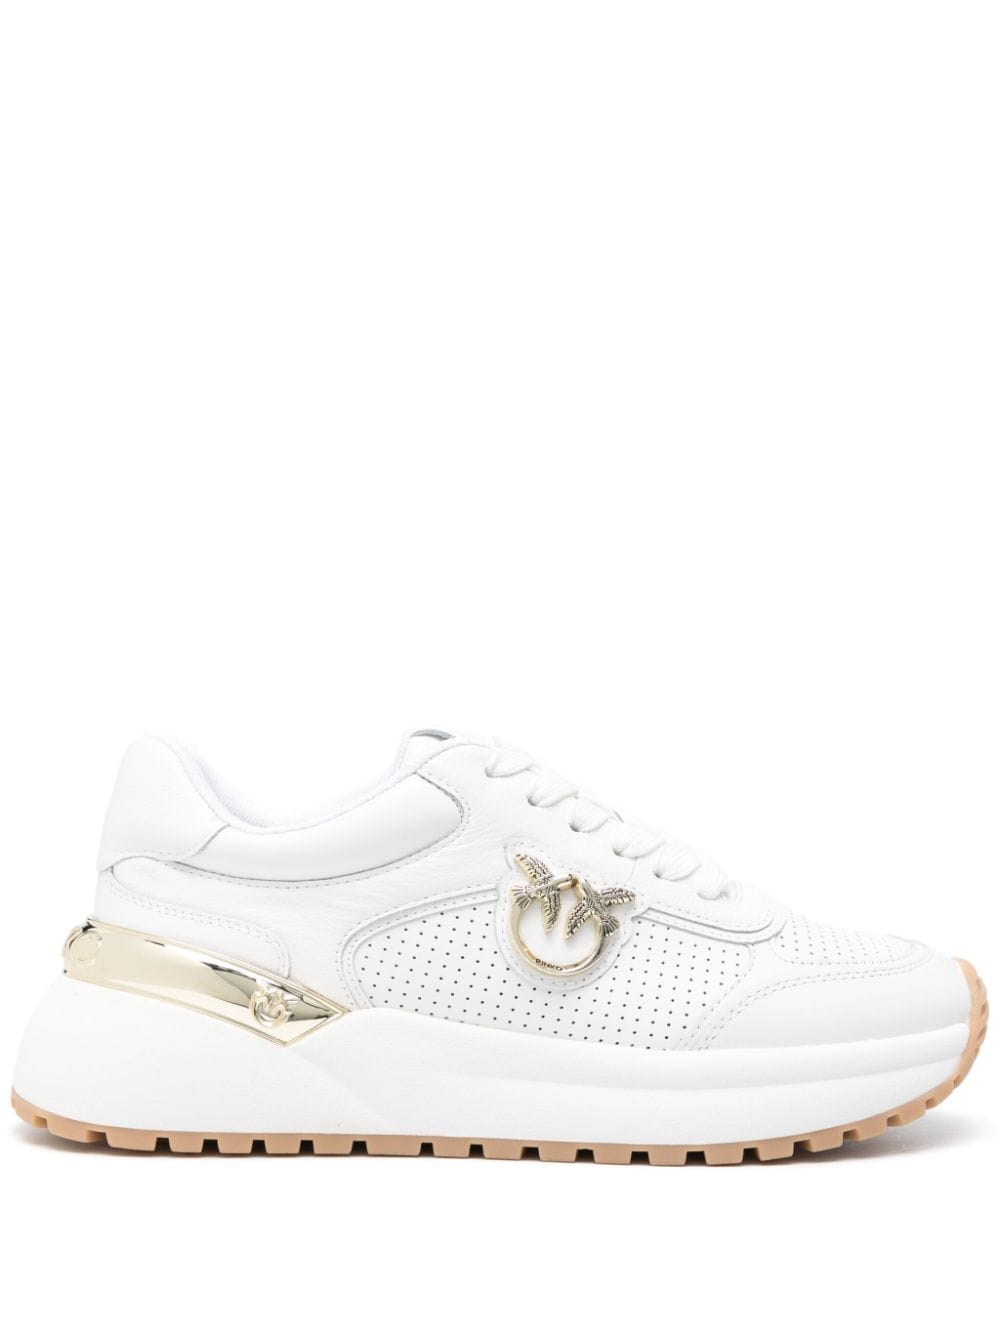 Pinko Love Birds Leather Sneakers In White